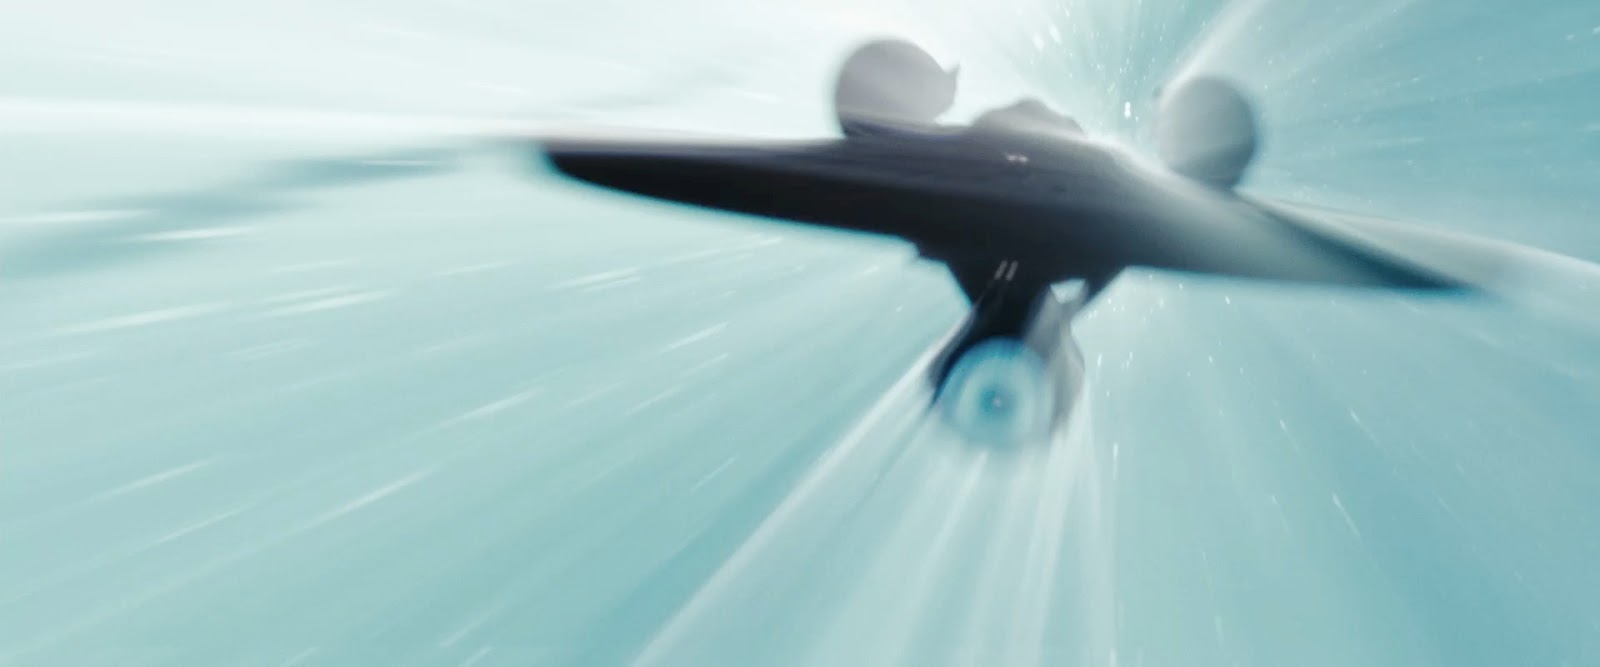 NASA Quietly Tests Engine That Uses No Fuel And Violates The Laws Of Physics  STAR_TREK_2009_SCREENSHOT_1